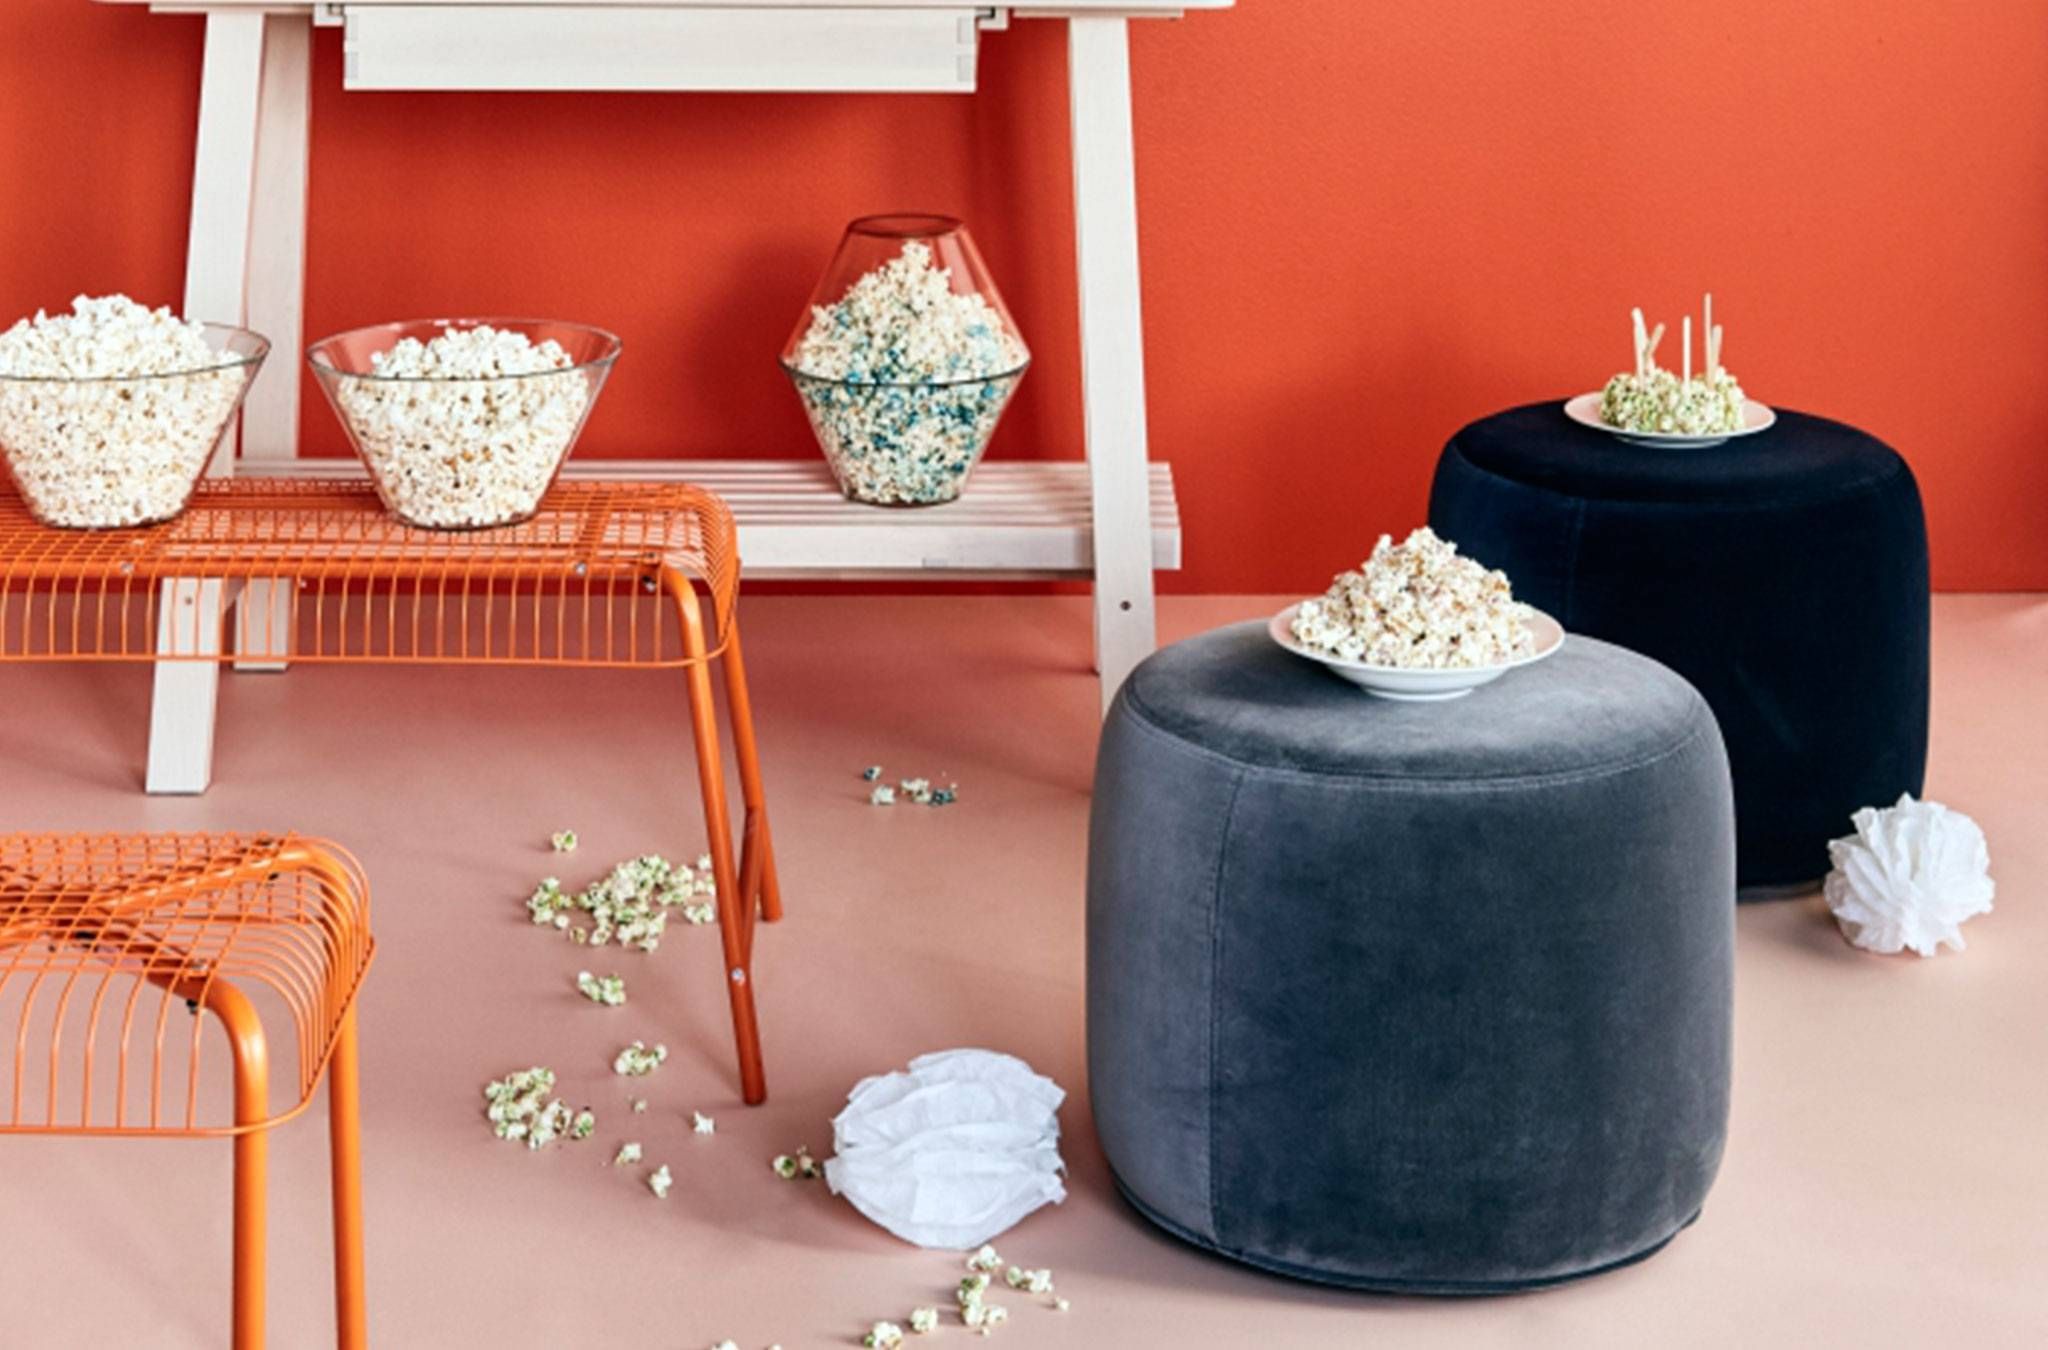 Footstools, Ottomans & Pouffes | Ikea With Regard To Footstools And Pouffes (View 6 of 30)